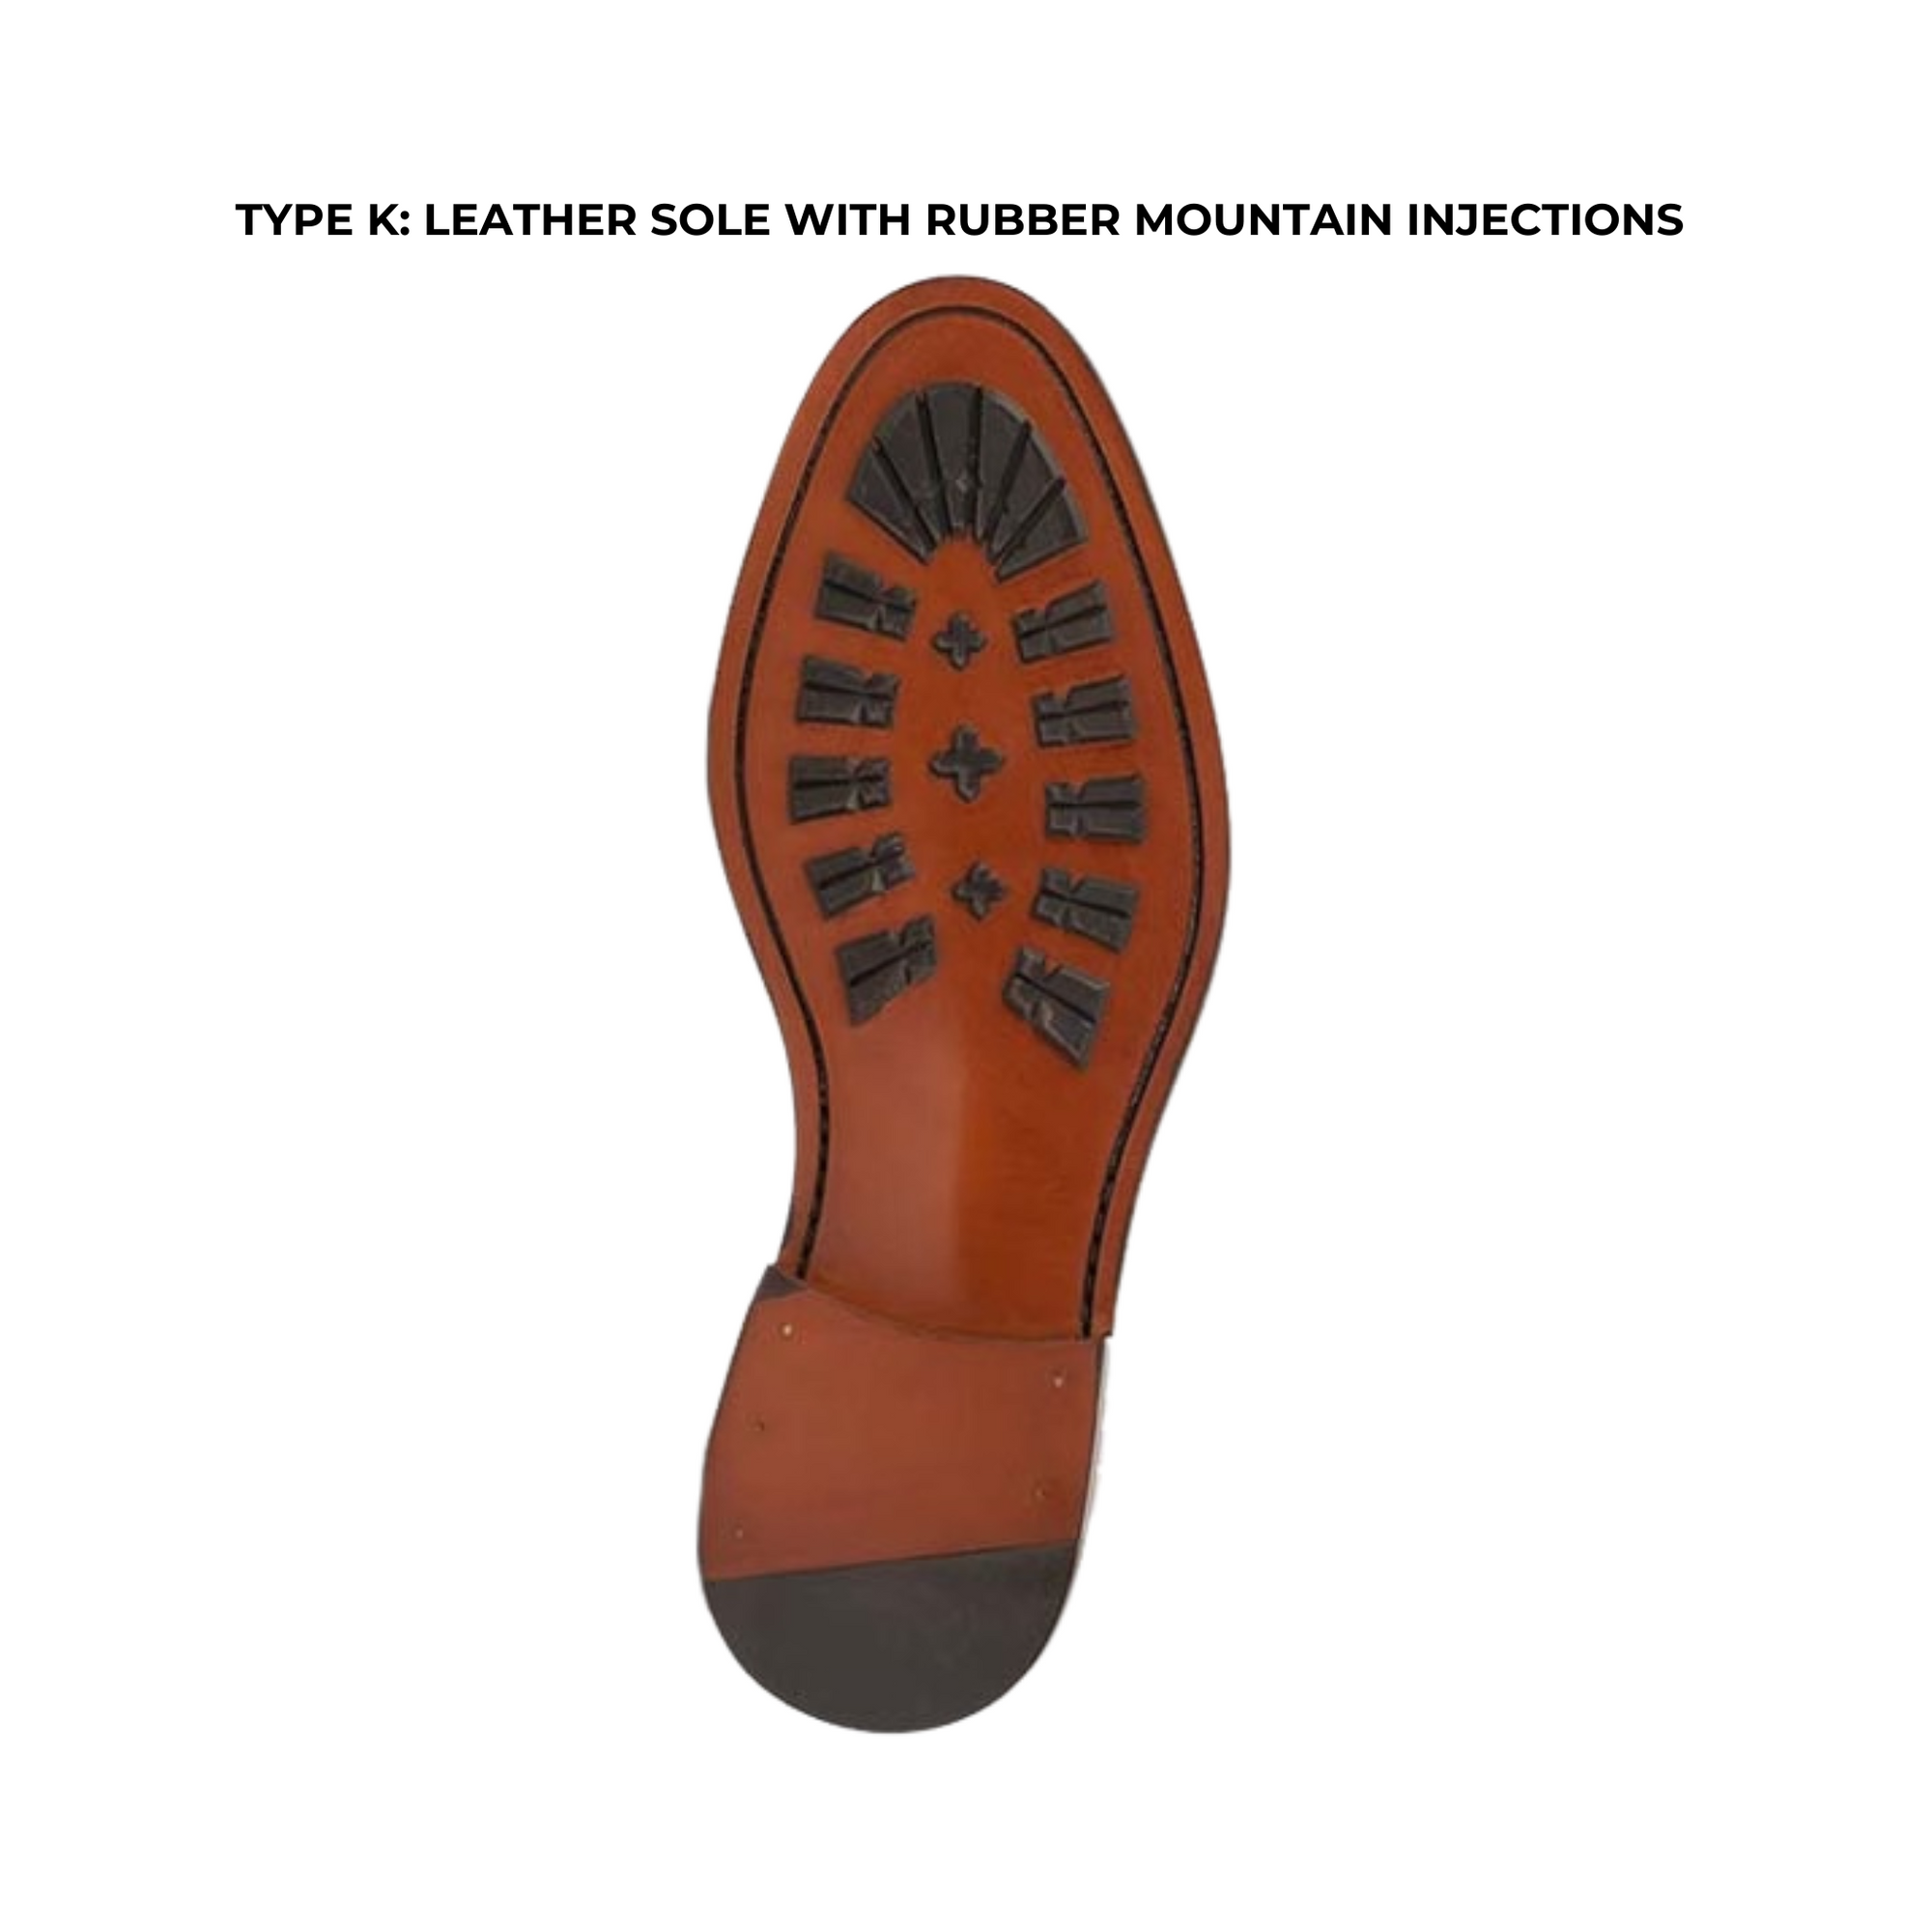 Leather sole with Rubber mountain injections